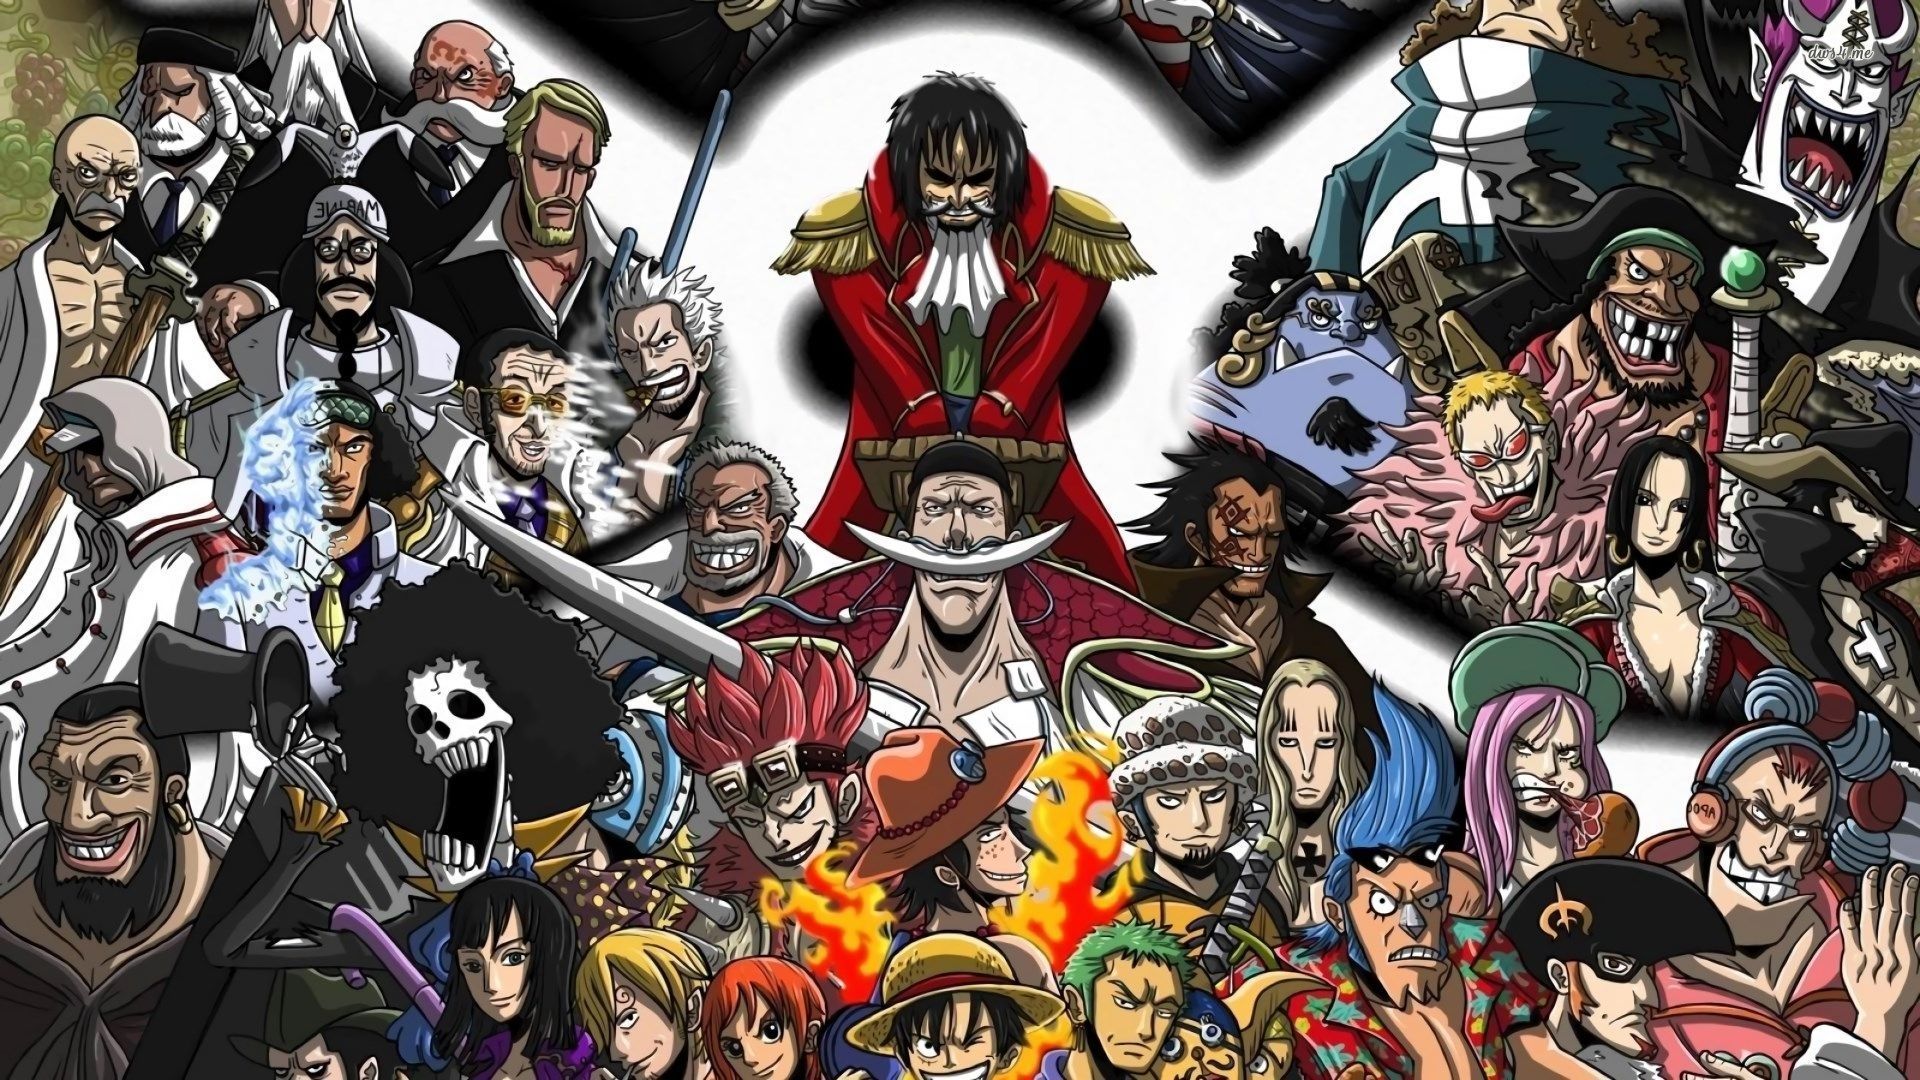 One Piece Wallpaper Full HD Piece Full HD is HD wallpaper & background for desktop or mobile device. To f. Anime wallpaper, Dragon ball, Anime dragon ball